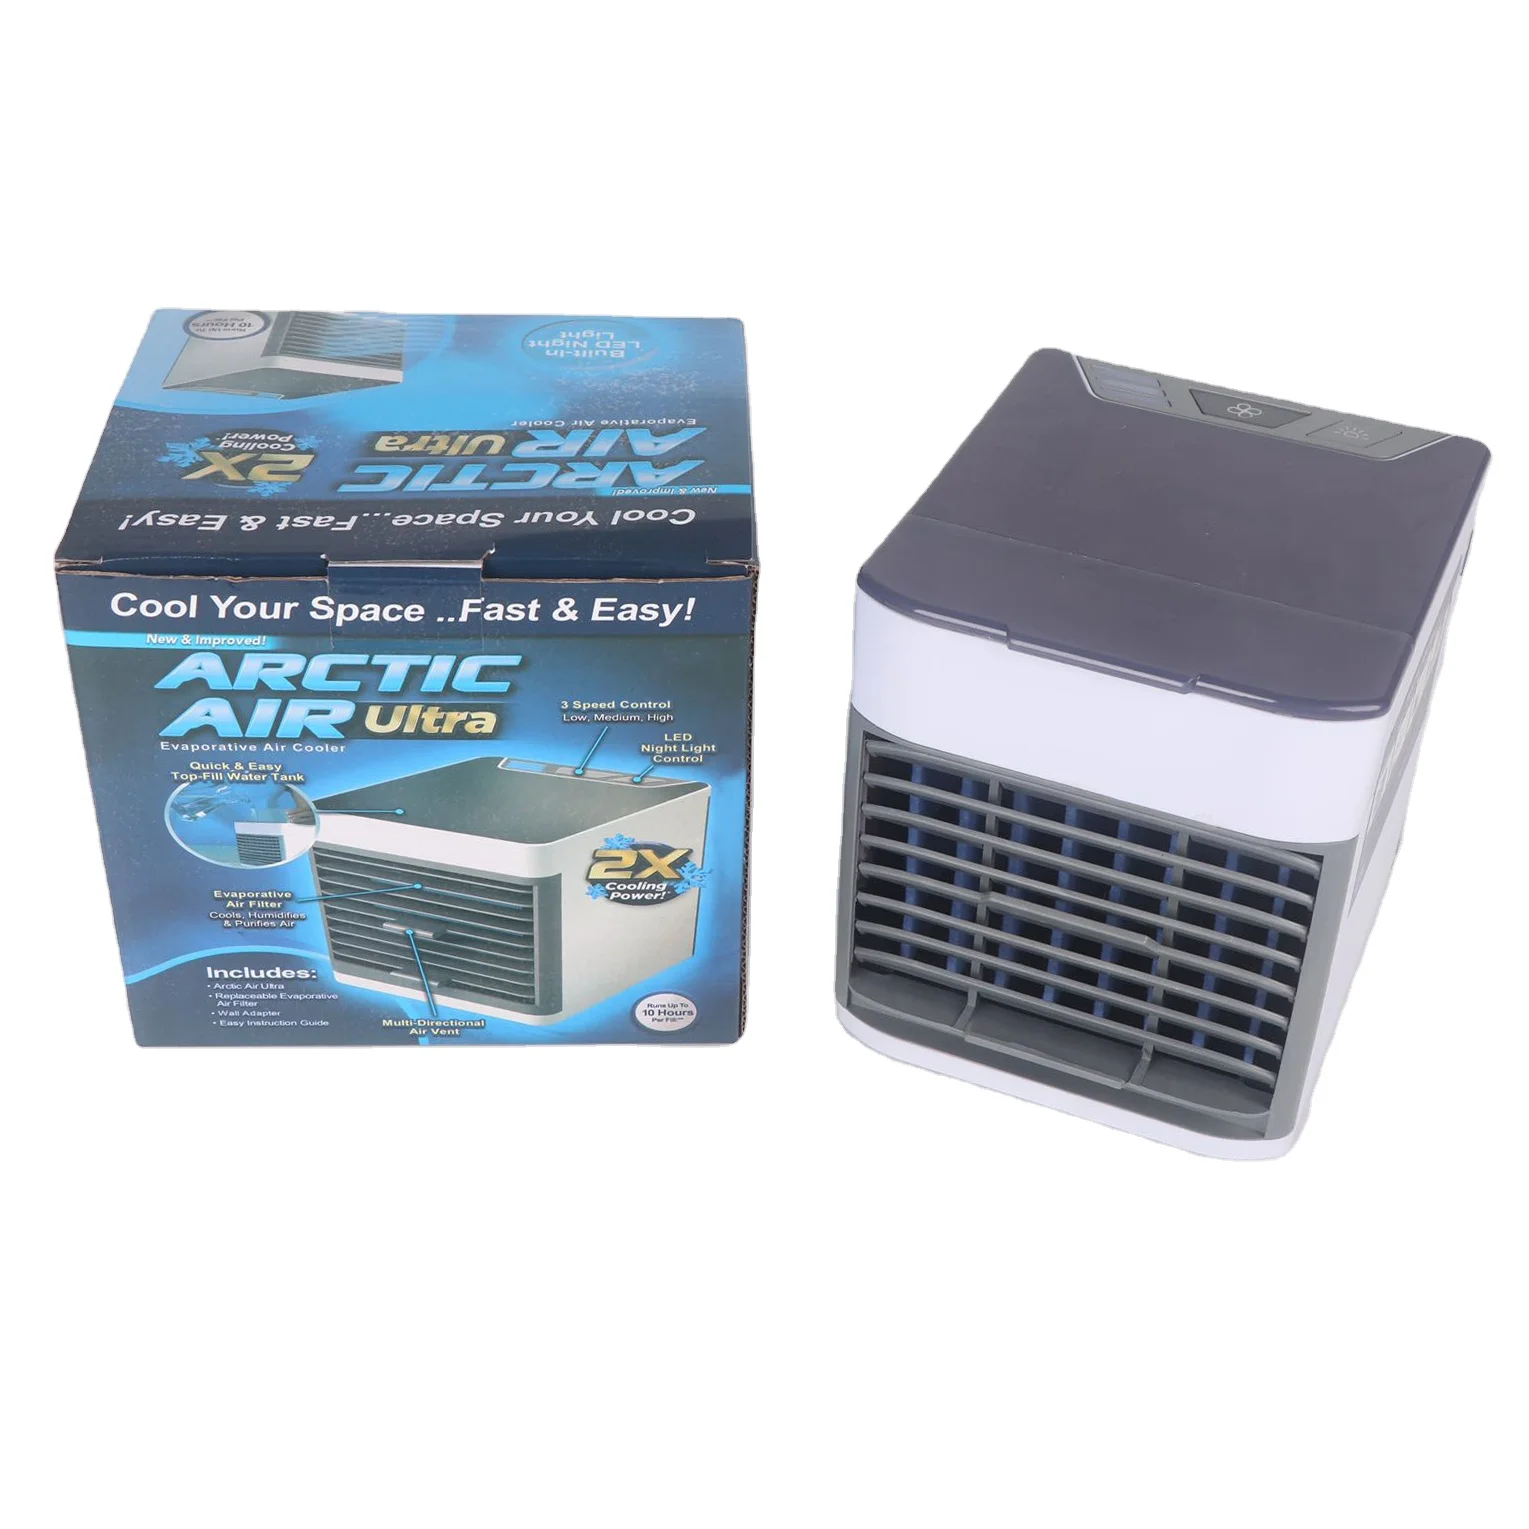 Hot selling USB portable air cooling space cooler mini cooler fan for home offices kitchen